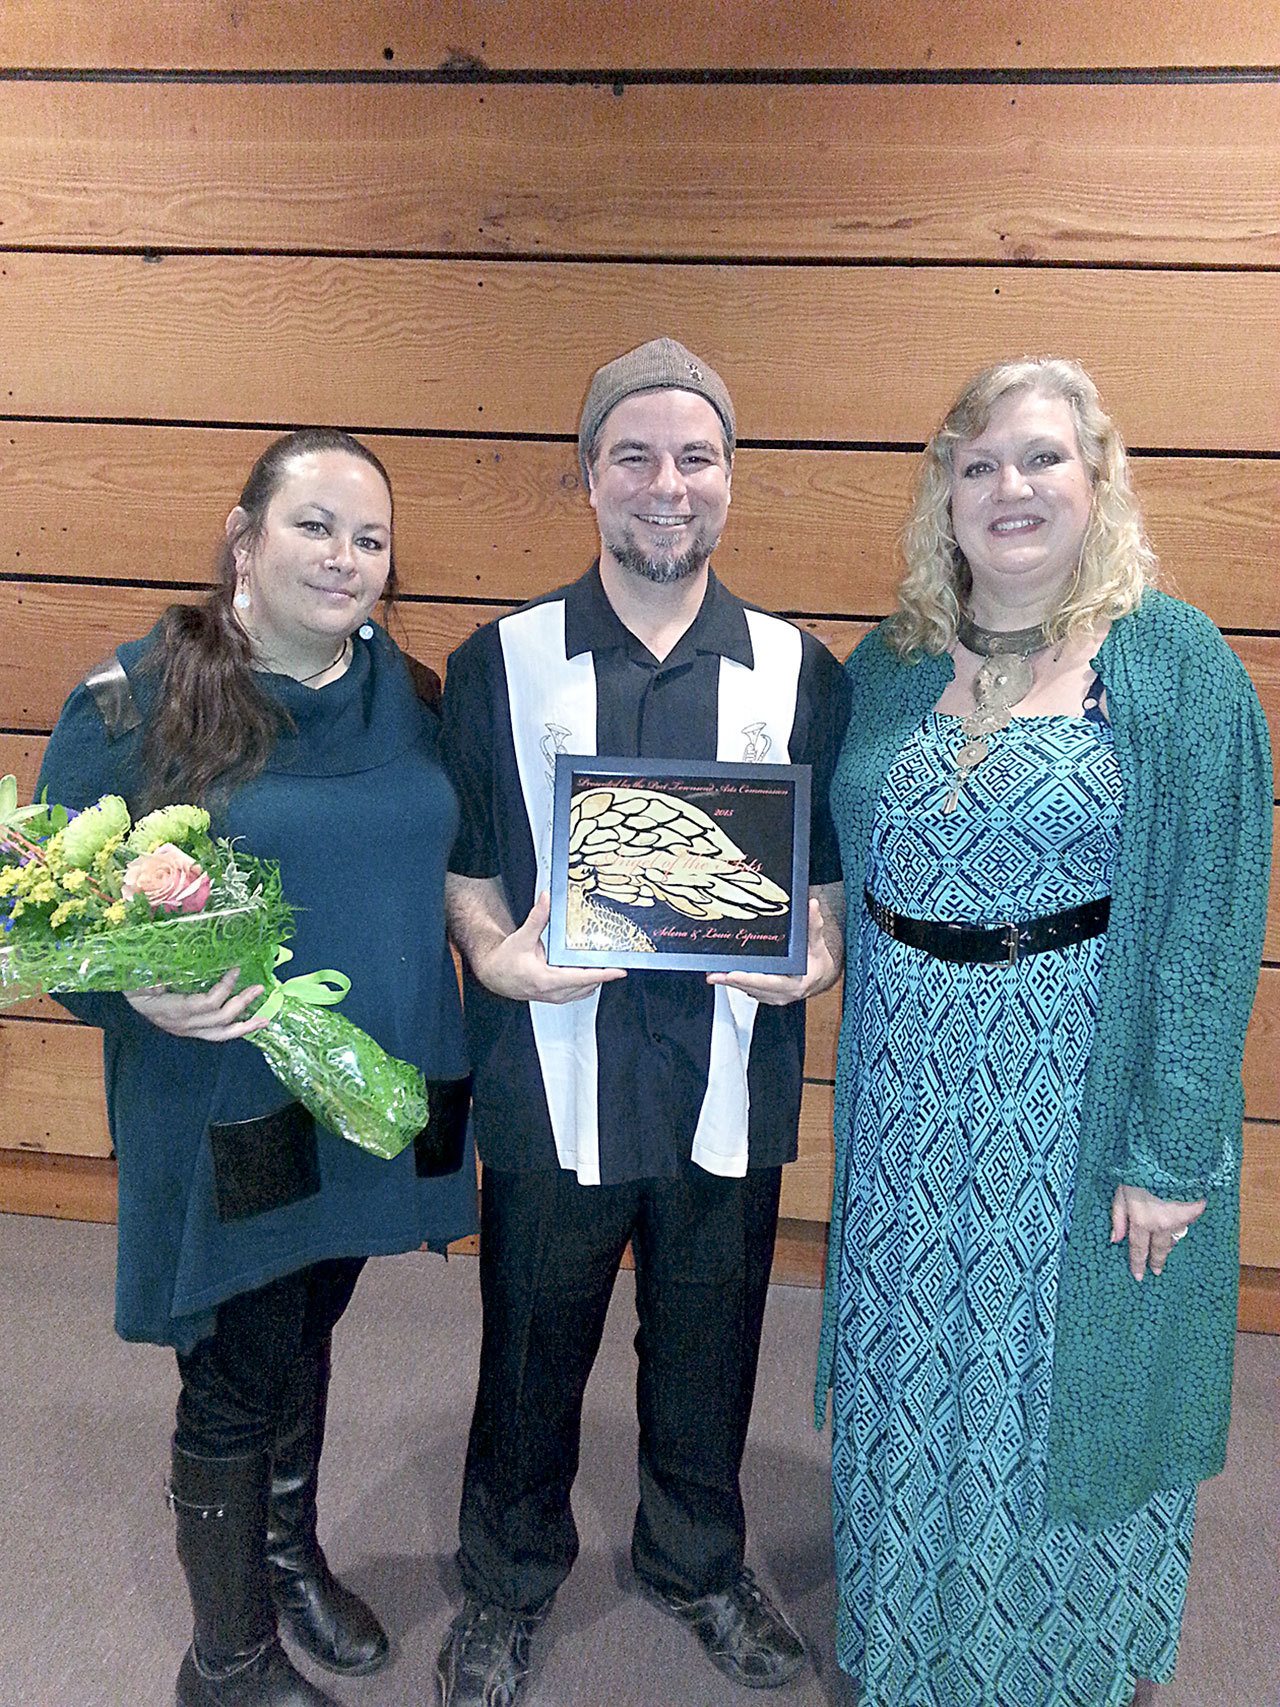 Last year’s Angel of the Arts award recipients Selena and Louie Espinoza pose with their award and Arts Commission member Lisa Wentworth. (Port Townsend Arts Commission)